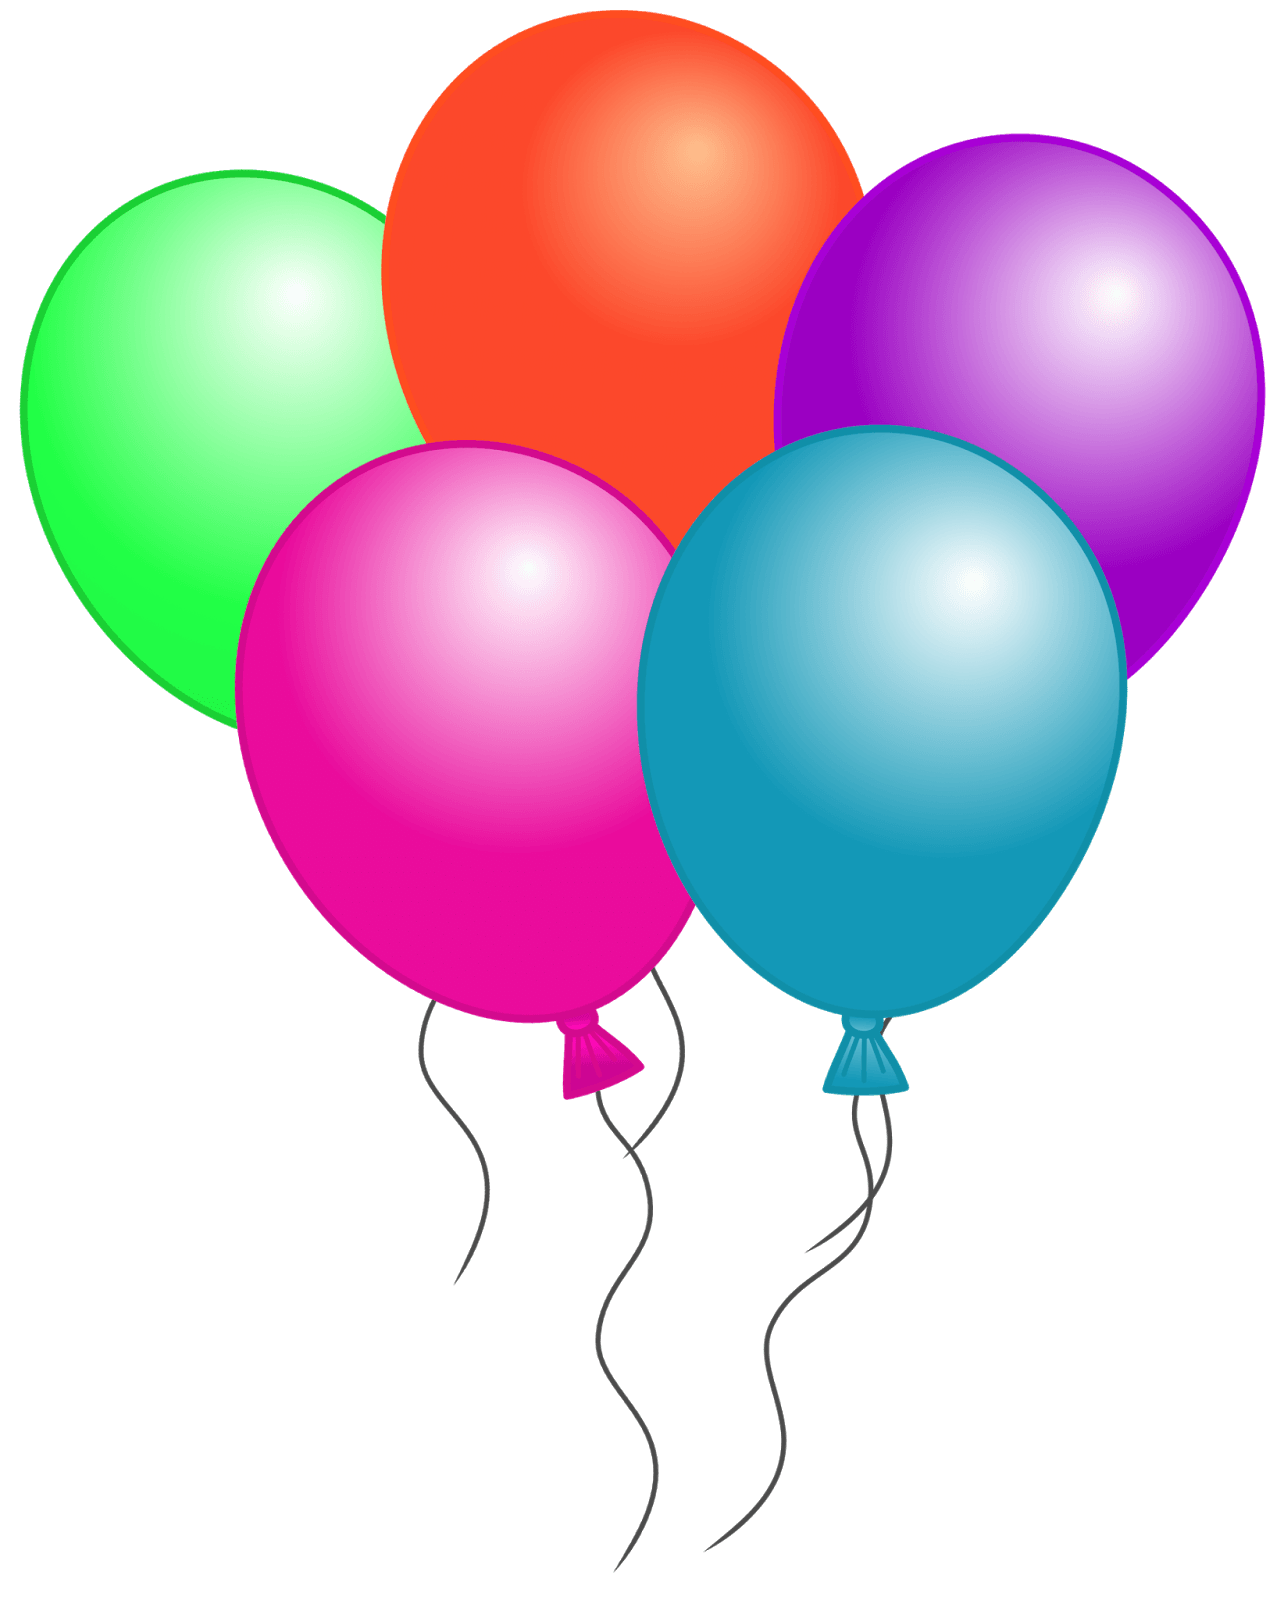 Free Balloon Template Cliparts, Download Free Balloon Template Cliparts